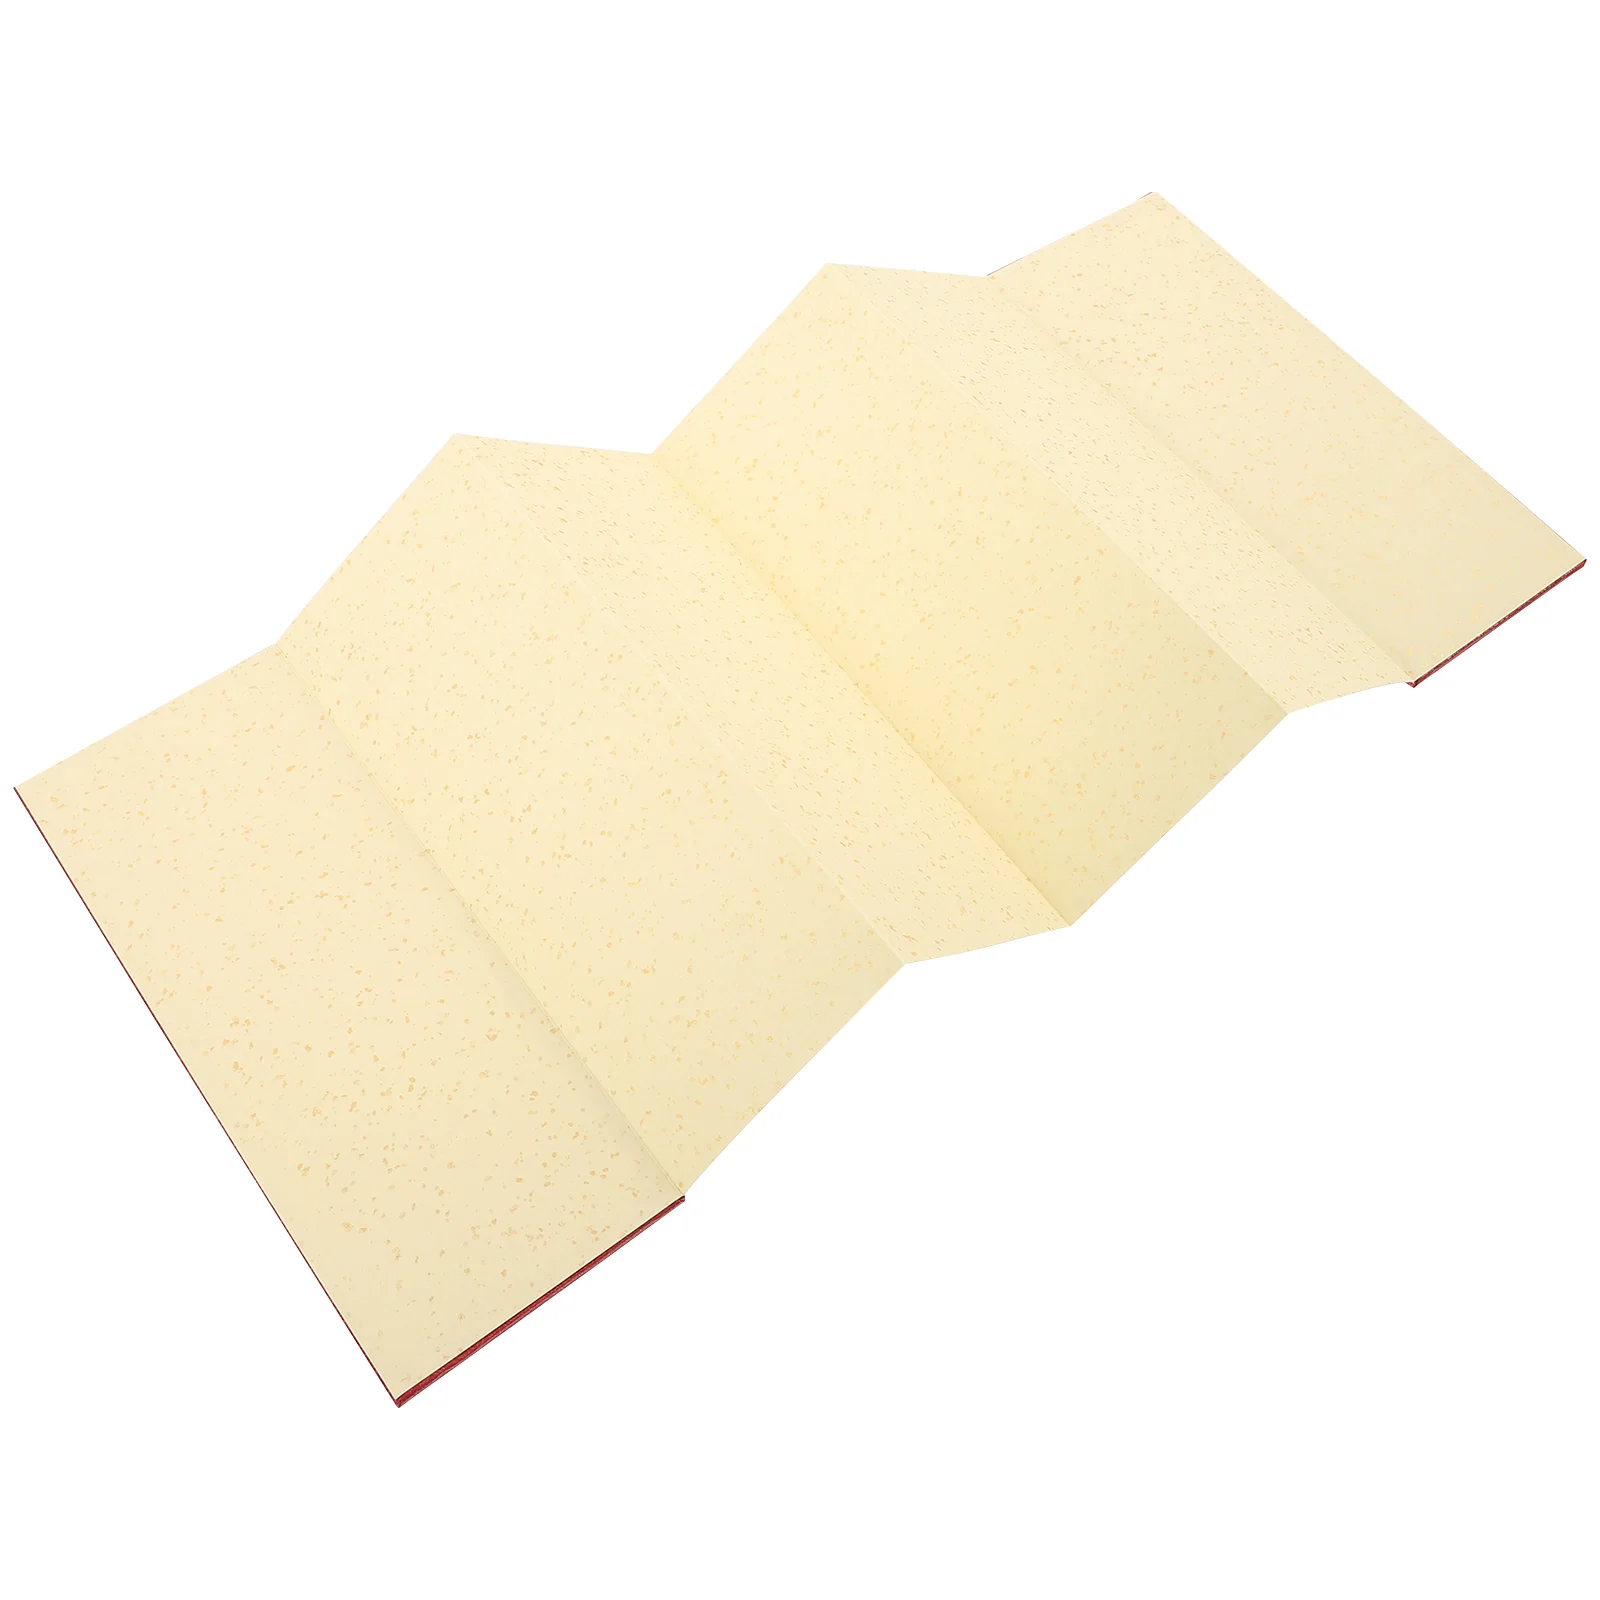 

Blank Writing Book Calligraphy Folding Page Book for Fish Roe Vintage Paper Parchment Writing Accessory Travel Drawing